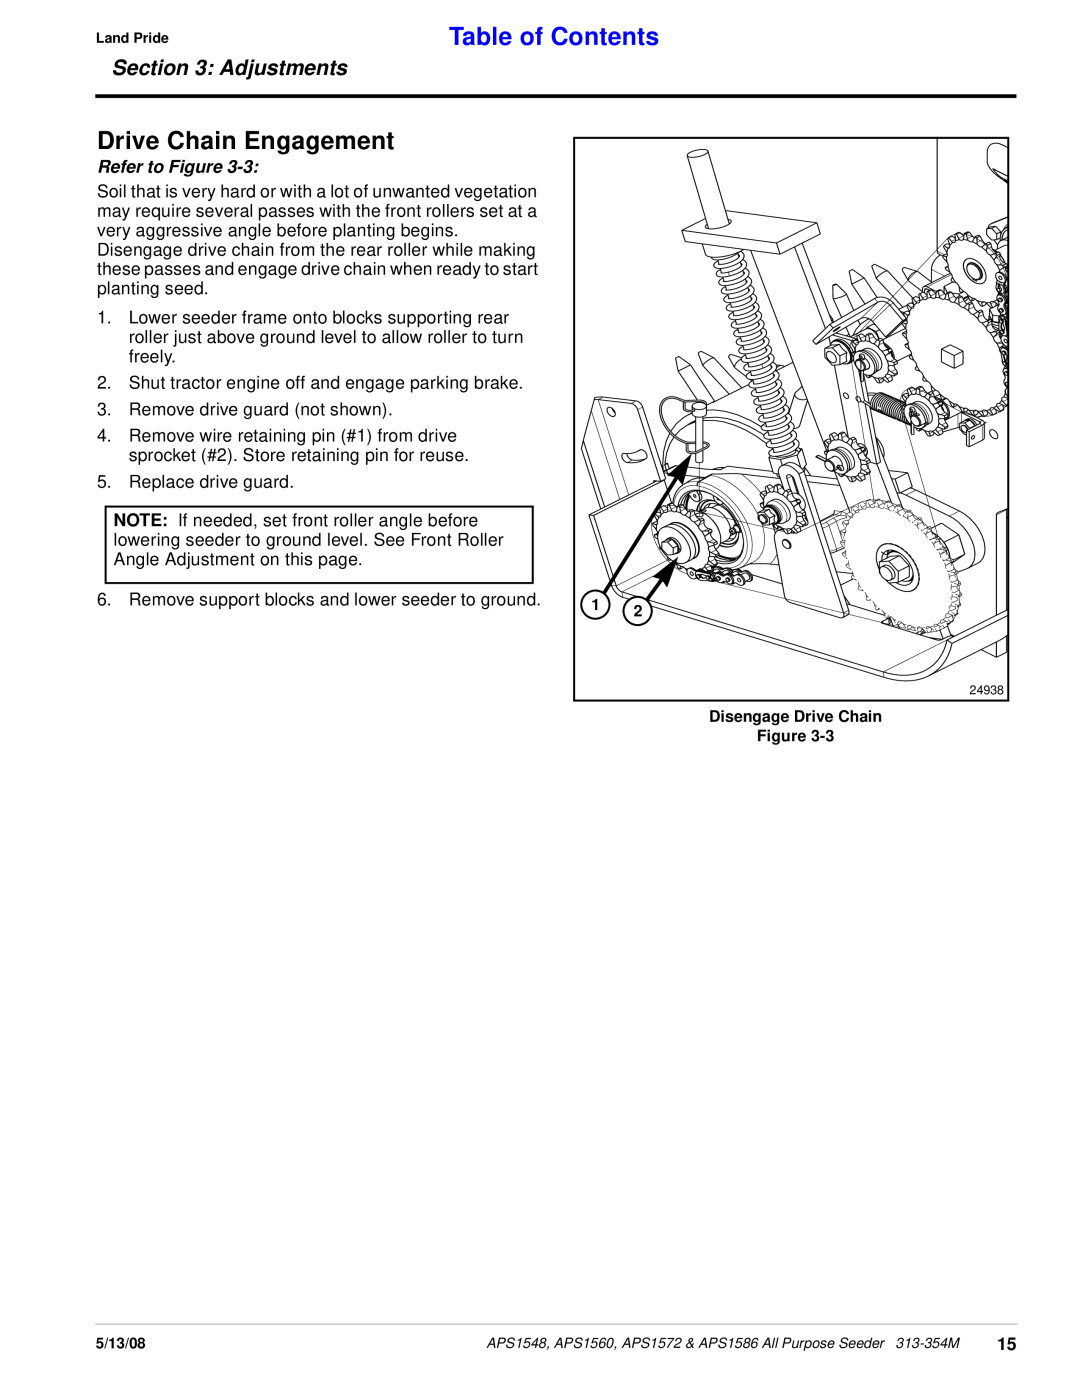 Land Pride APS1572, APS1560, APS1586, APS1548 manual Drive Chain Engagement, Table of Contents, Adjustments, Refer to Figure 